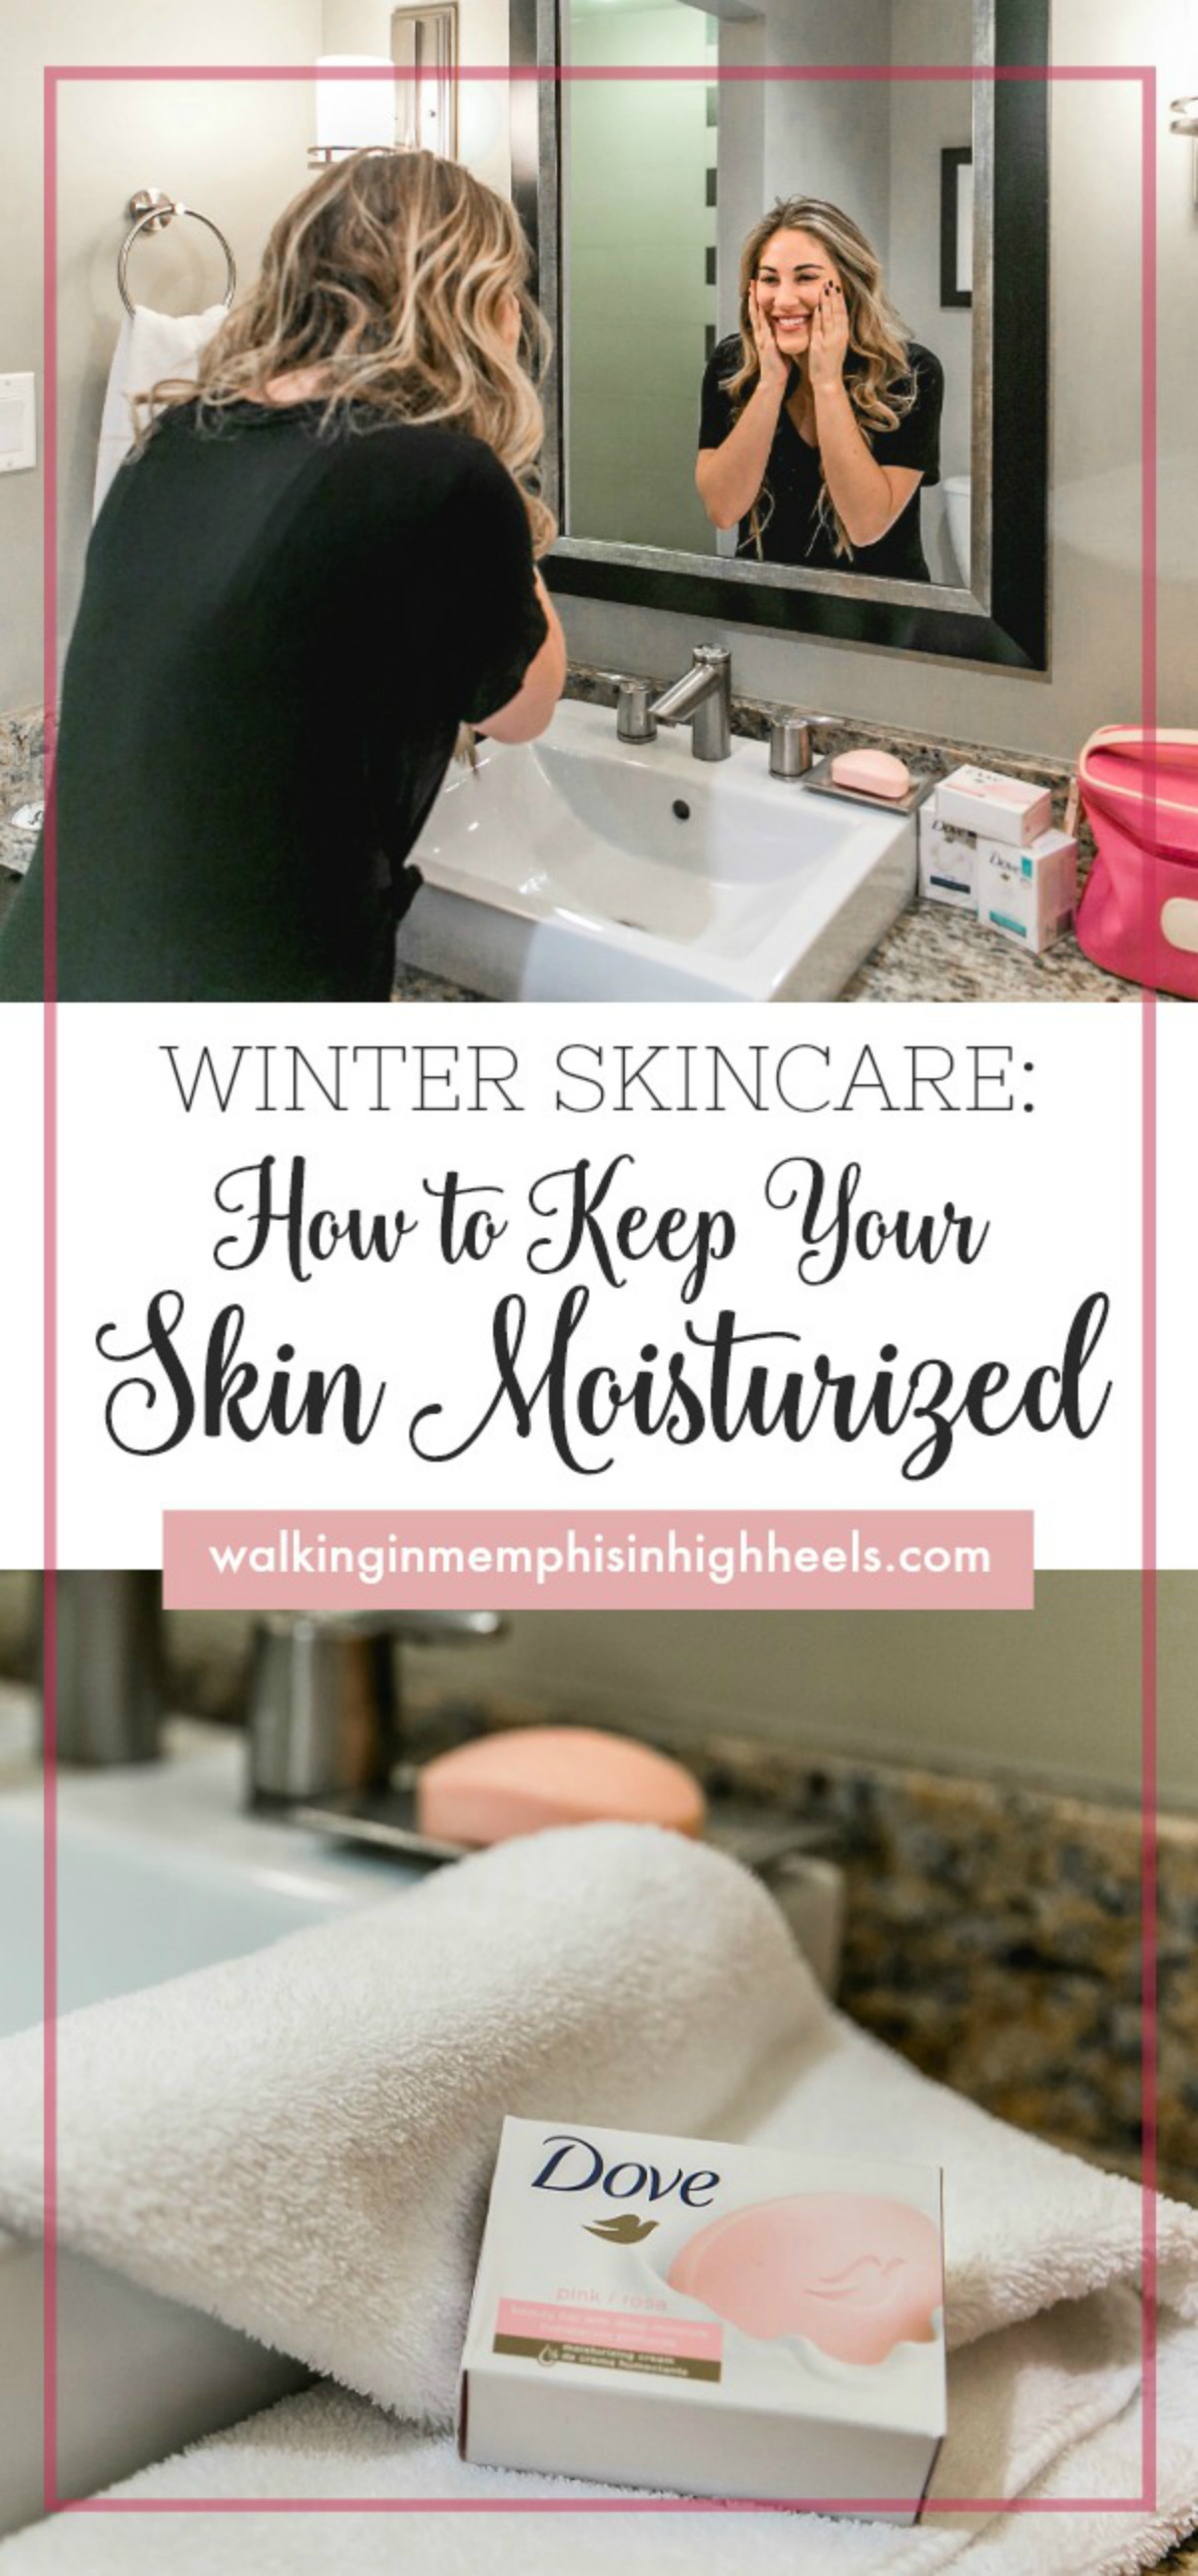 How to Keep Your Skin Moisturized during Winter